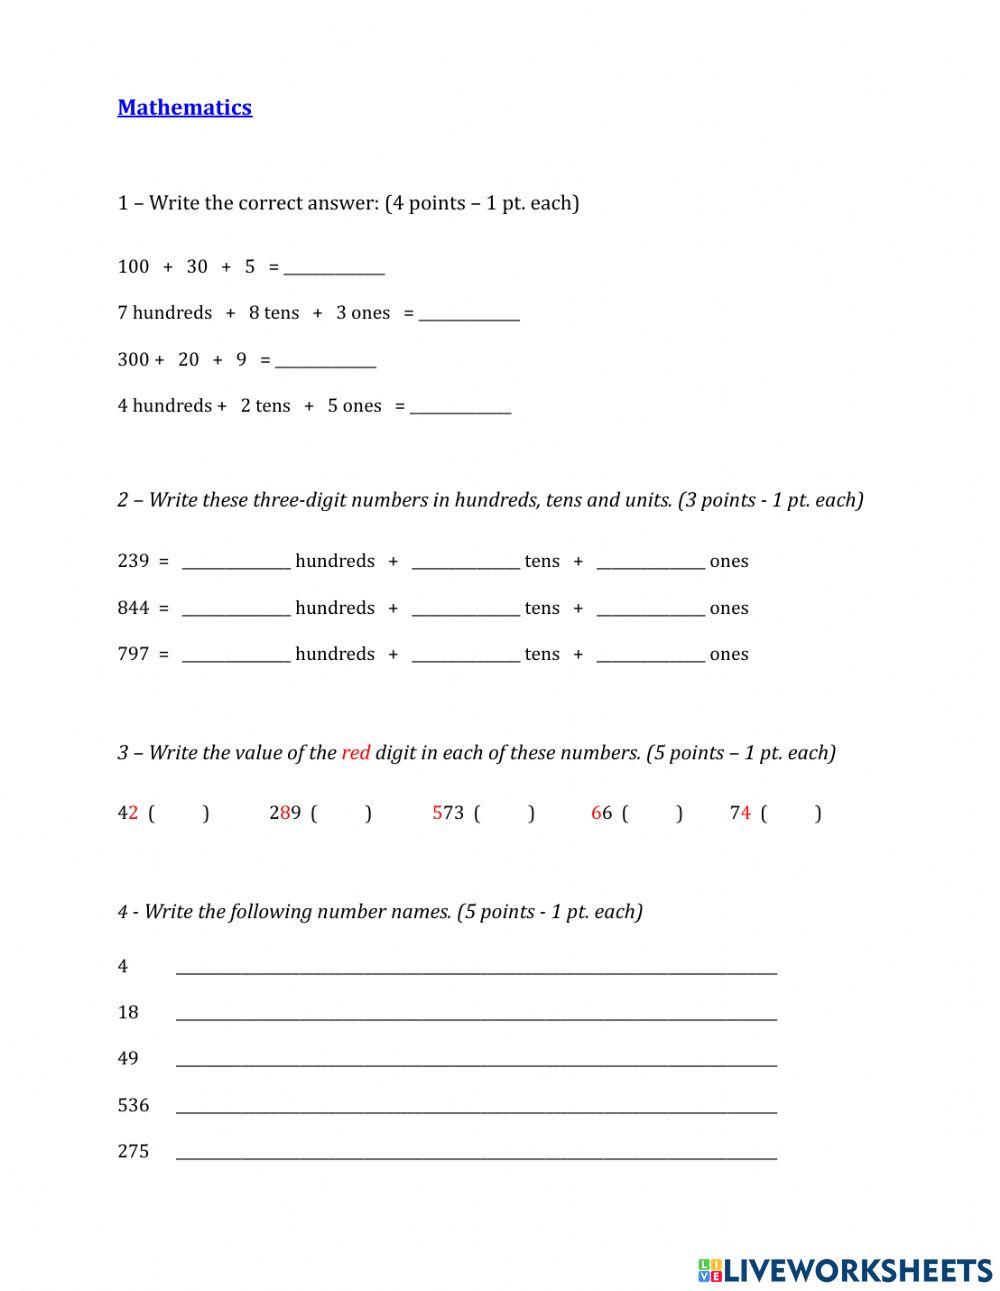 G2 1st Quarter Science and Math Test